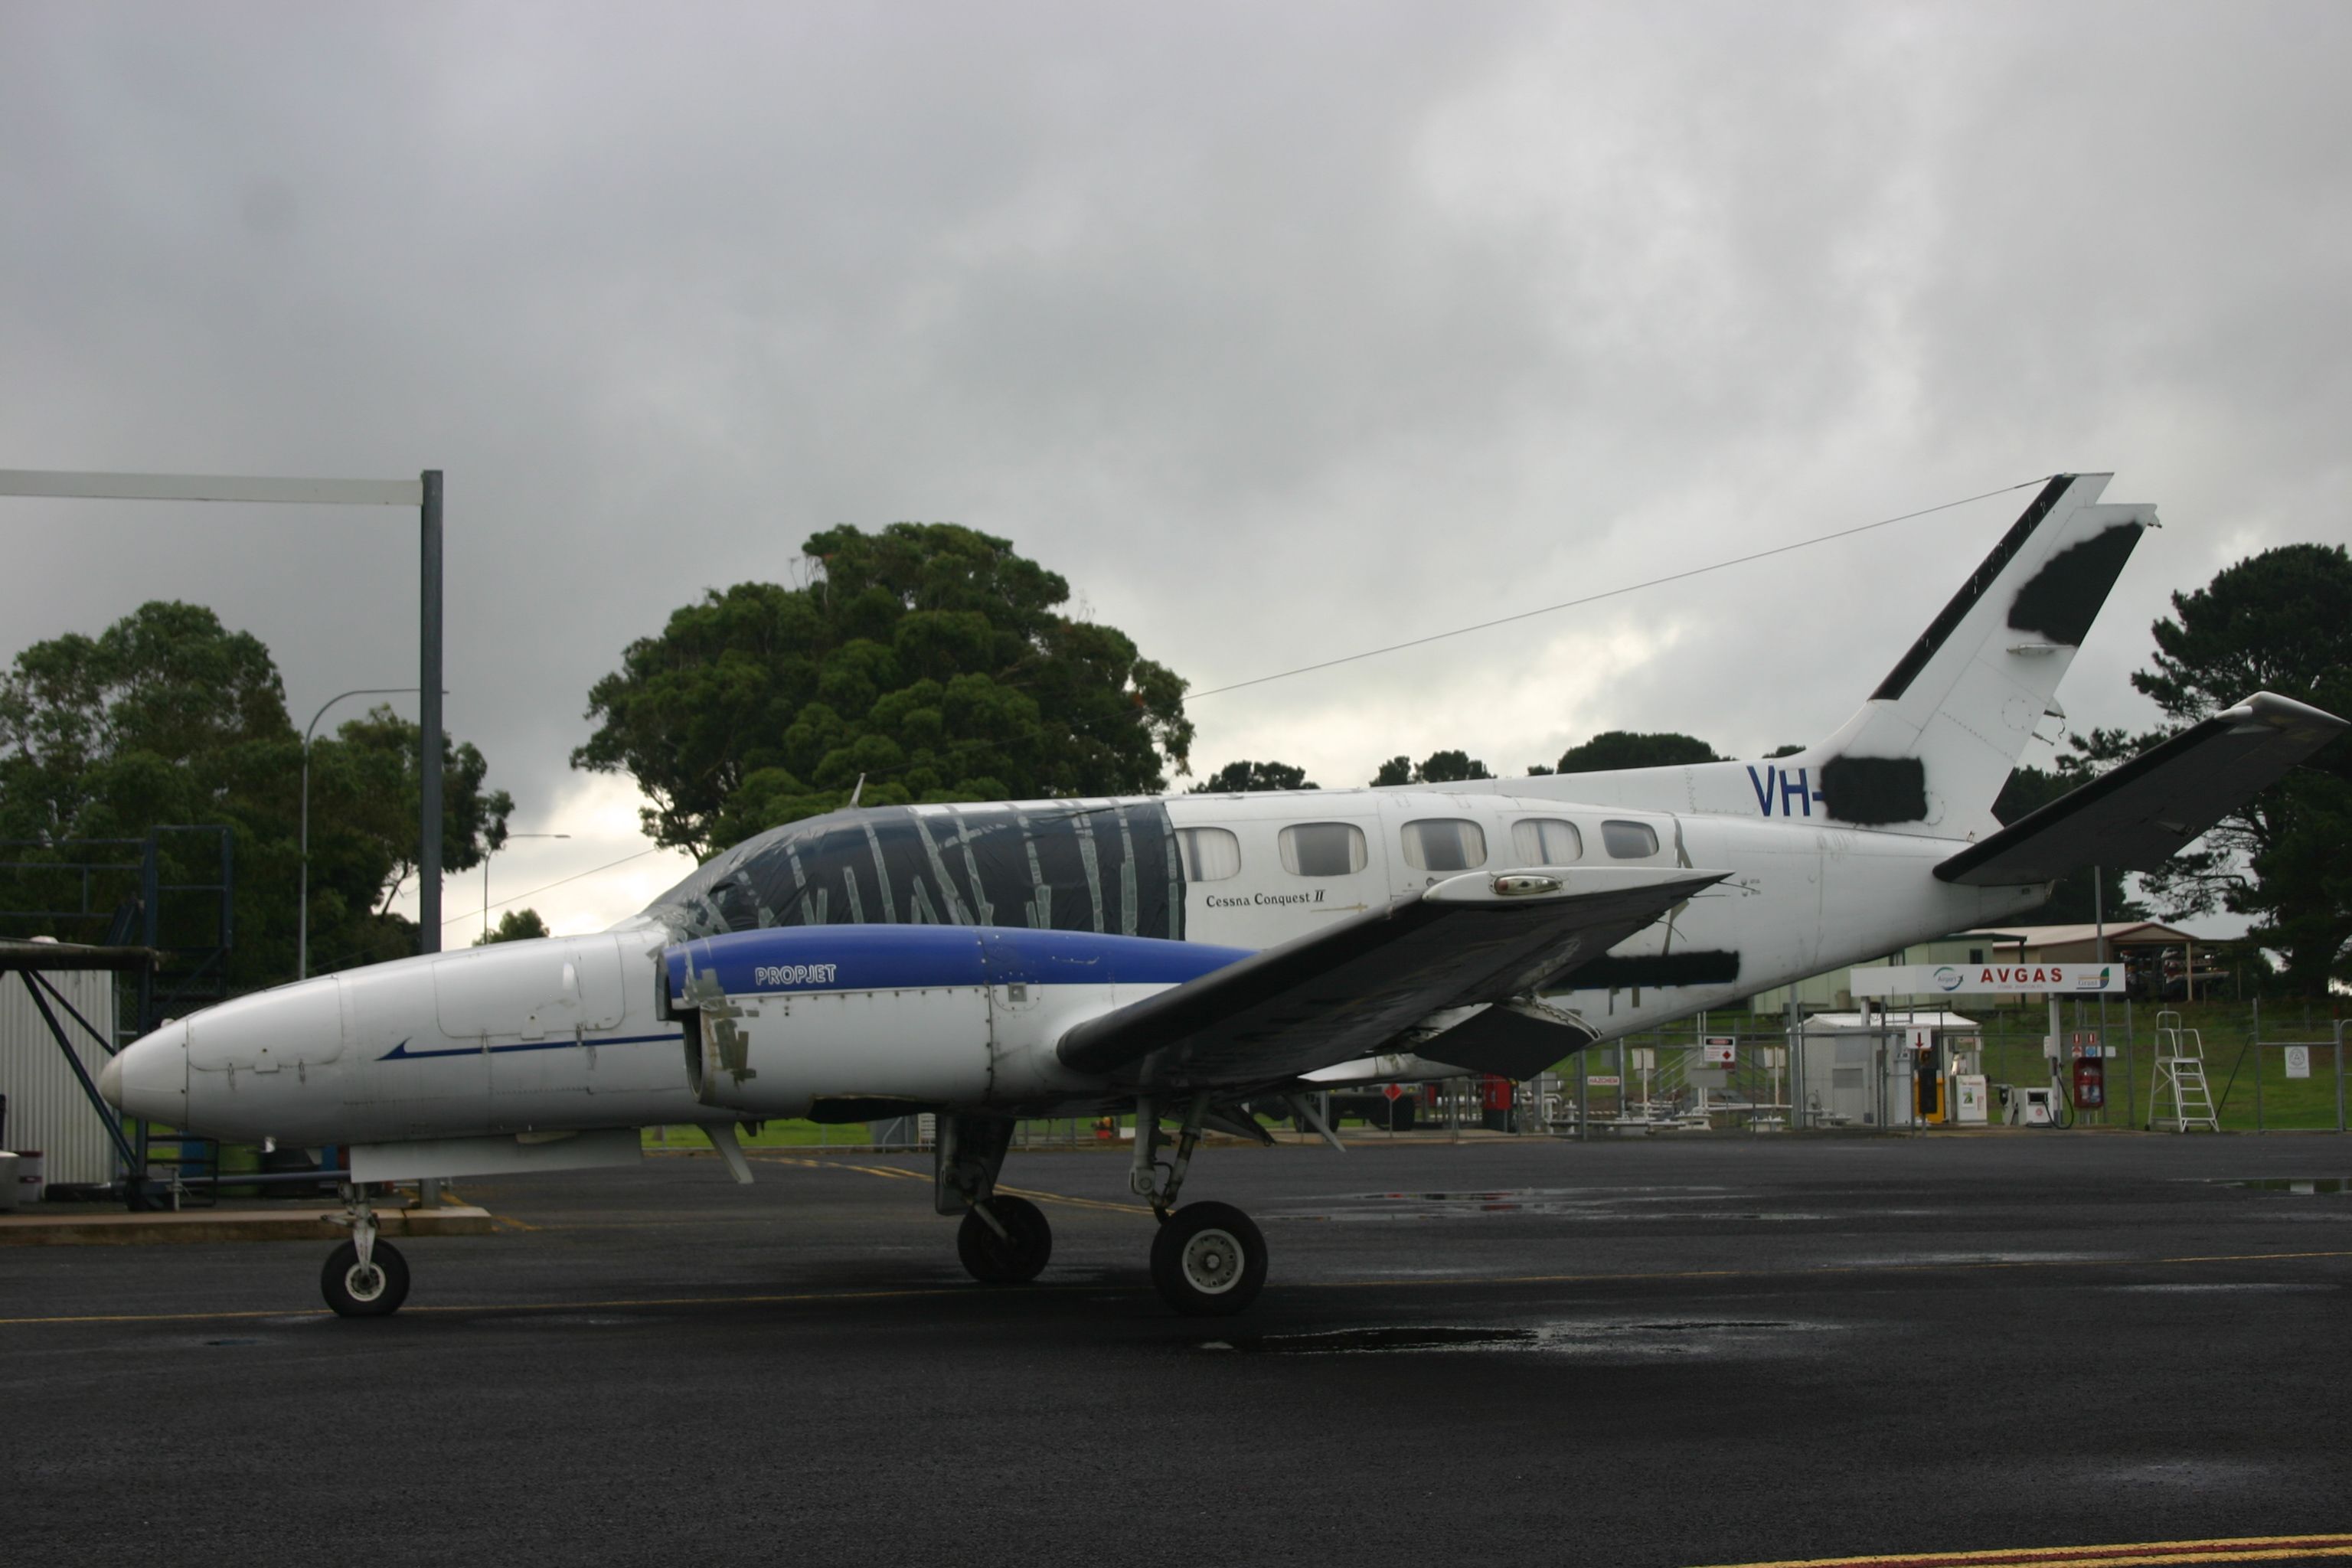 An Australian Cessna 441 Conquest II parked and stored at an airport.